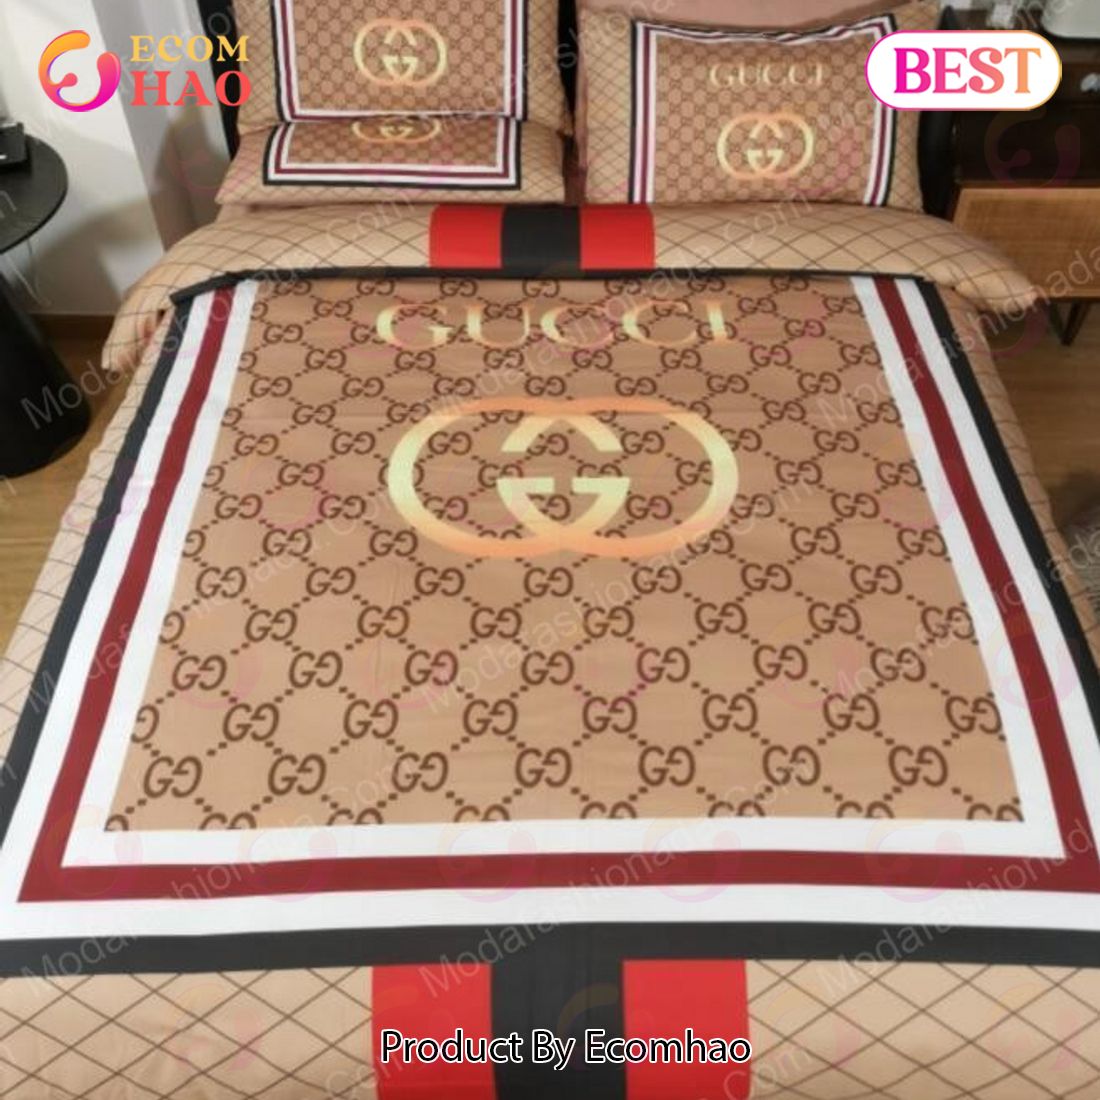 Louis Vuitton Bedding Sets Model 106 Luxury Brand Bedding Set Duvet Cover  Home Decoration Bedding Sets - Ecomhao Store